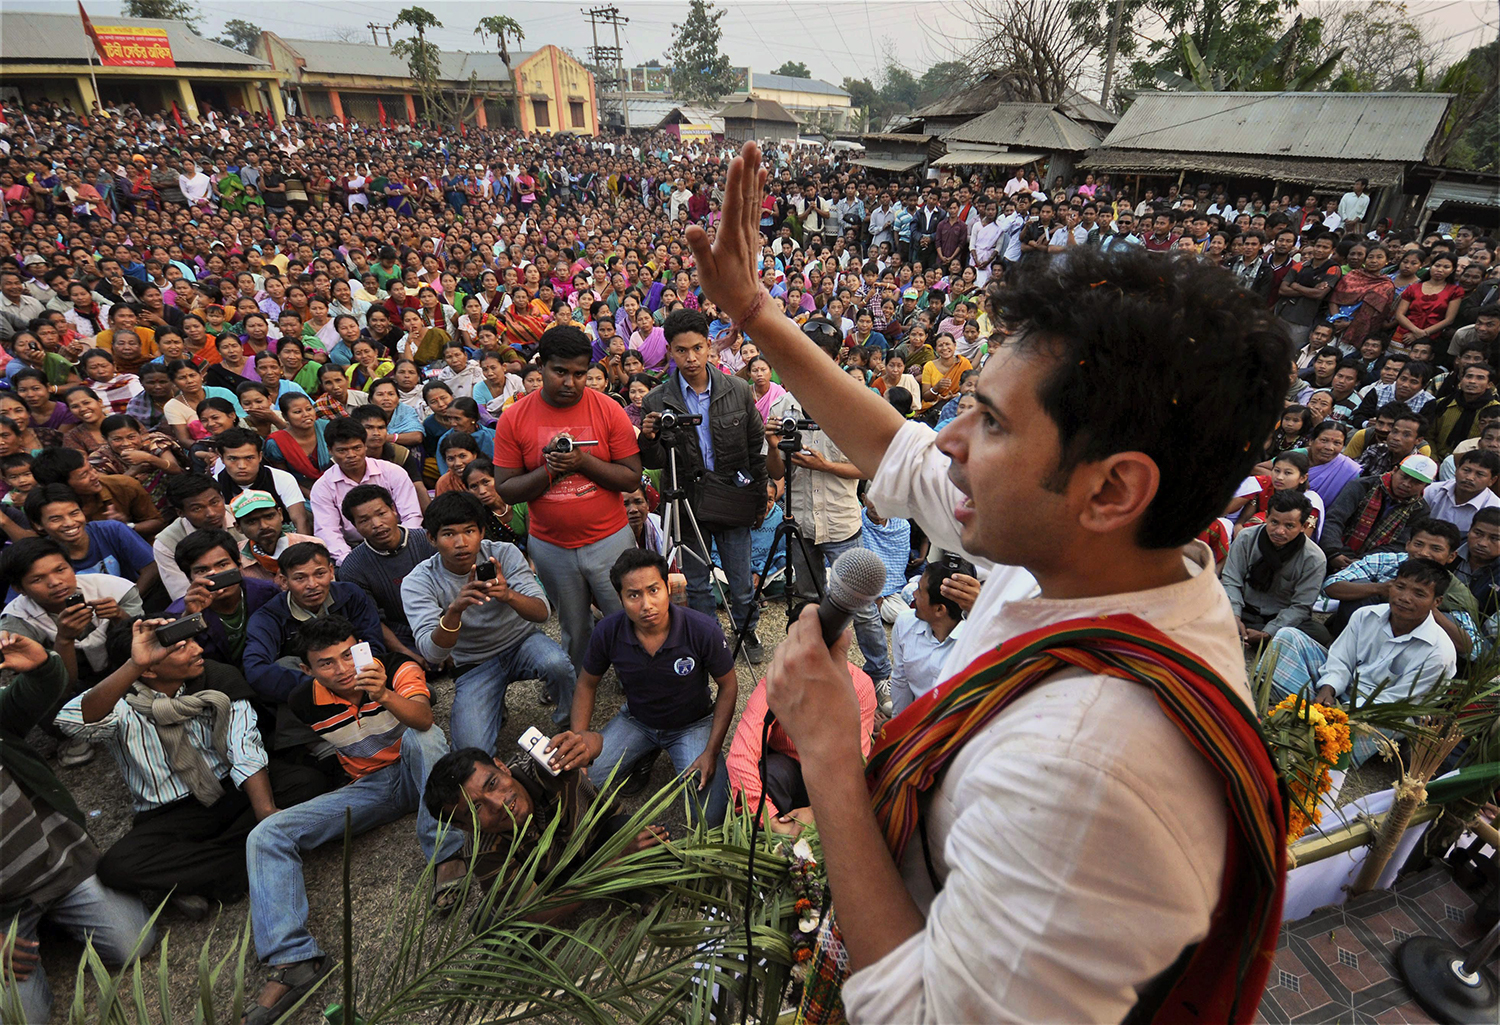 “We want self-rule”: Pradyot Debbarma on his party’s victory in Tripura tribal council polls